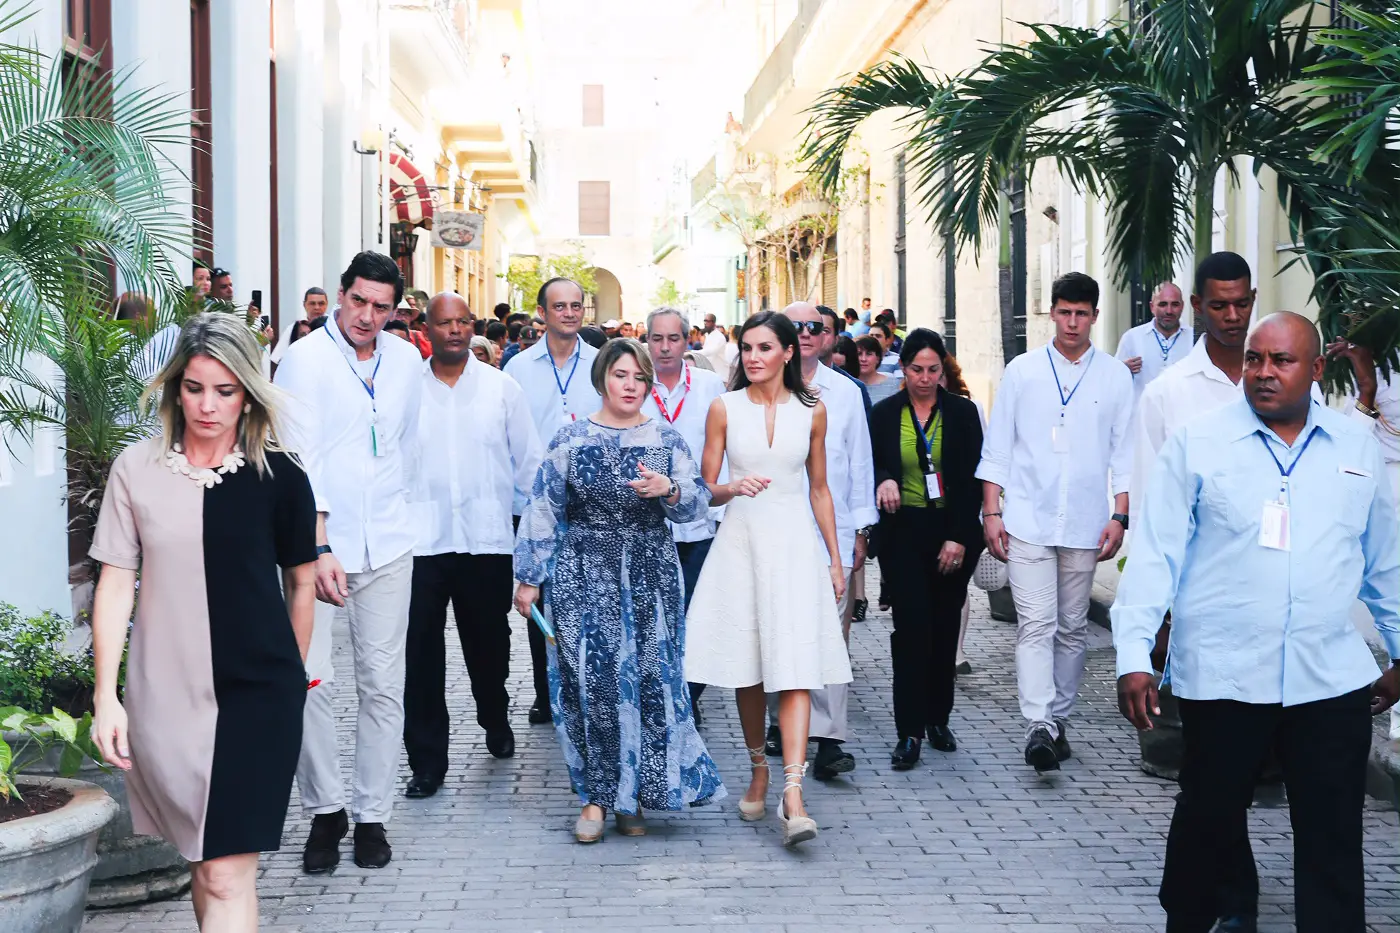 Queen Letizia of Spain wore a stunning white dress during Havana City in Cuba